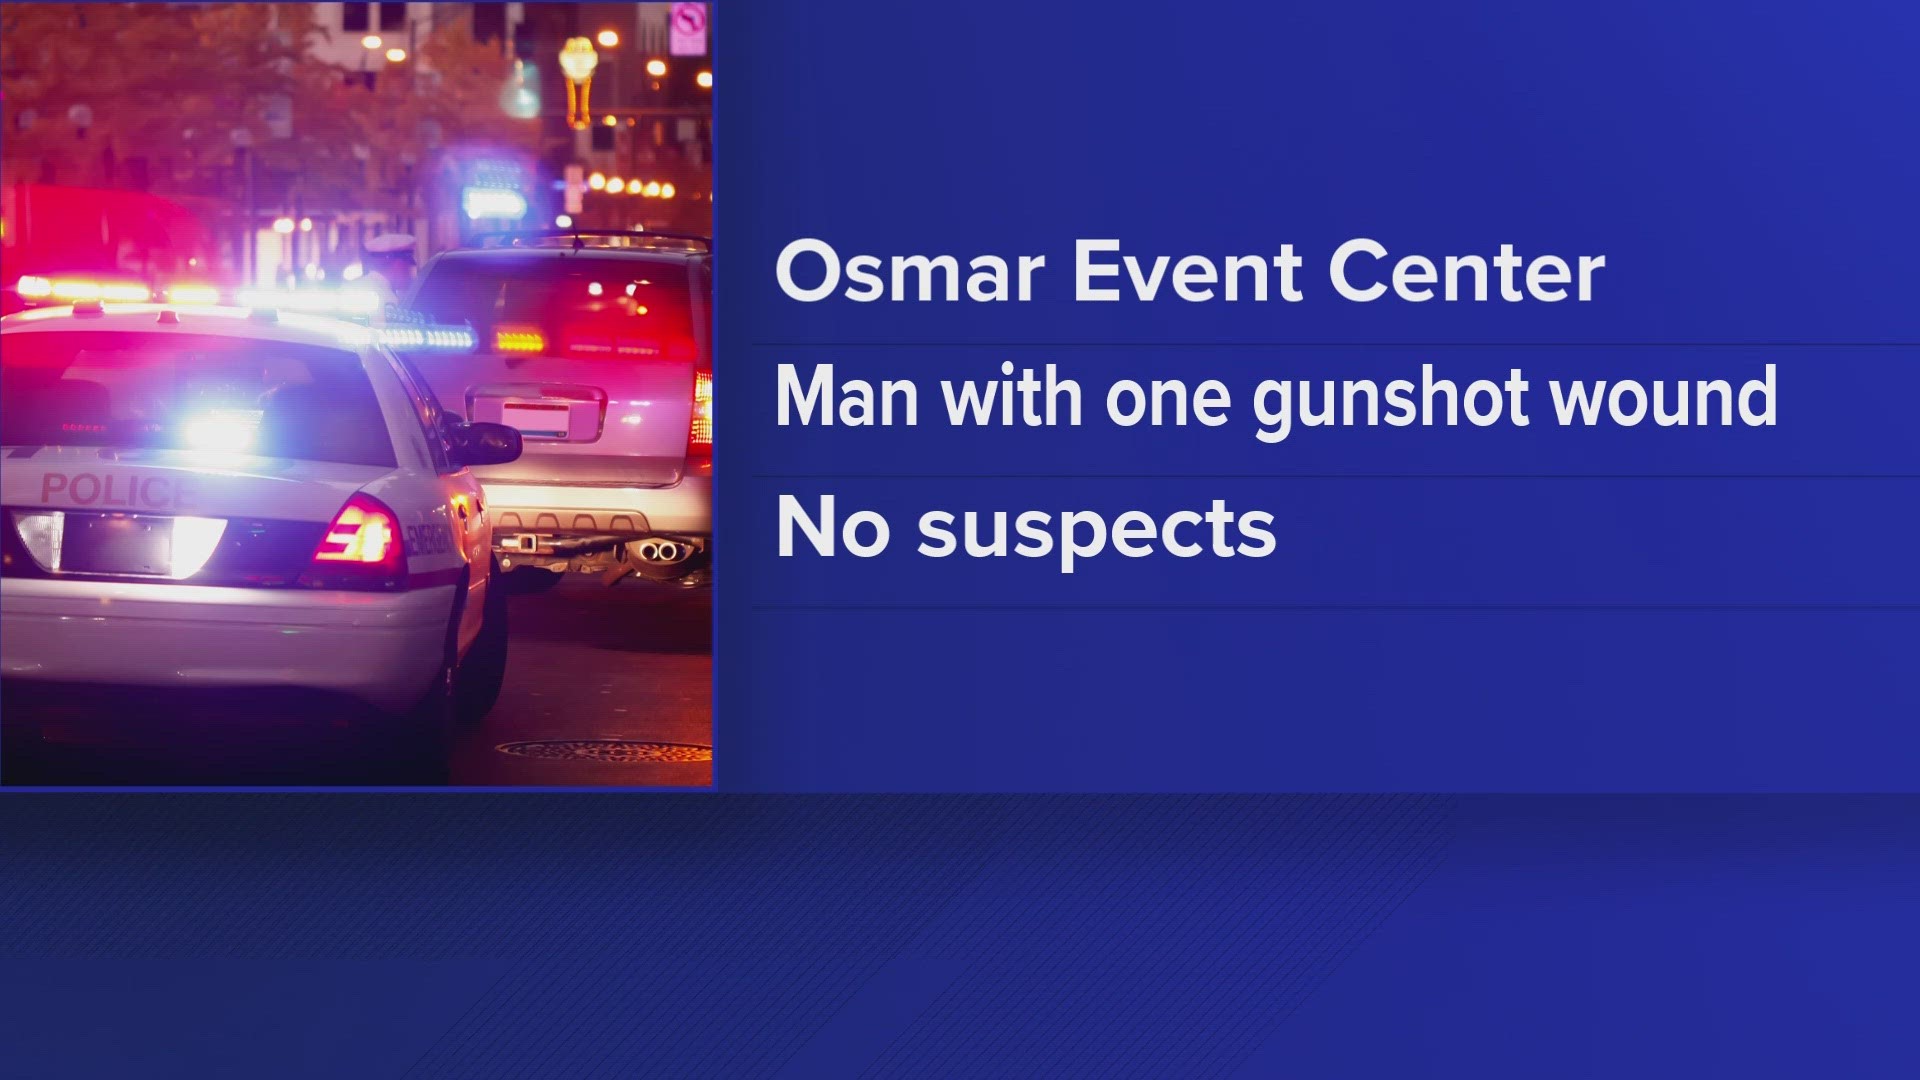 KPD said they were called to the Osmar Event Center around 1 a.m. They found a man outside of the center with at least one gunshot wound.